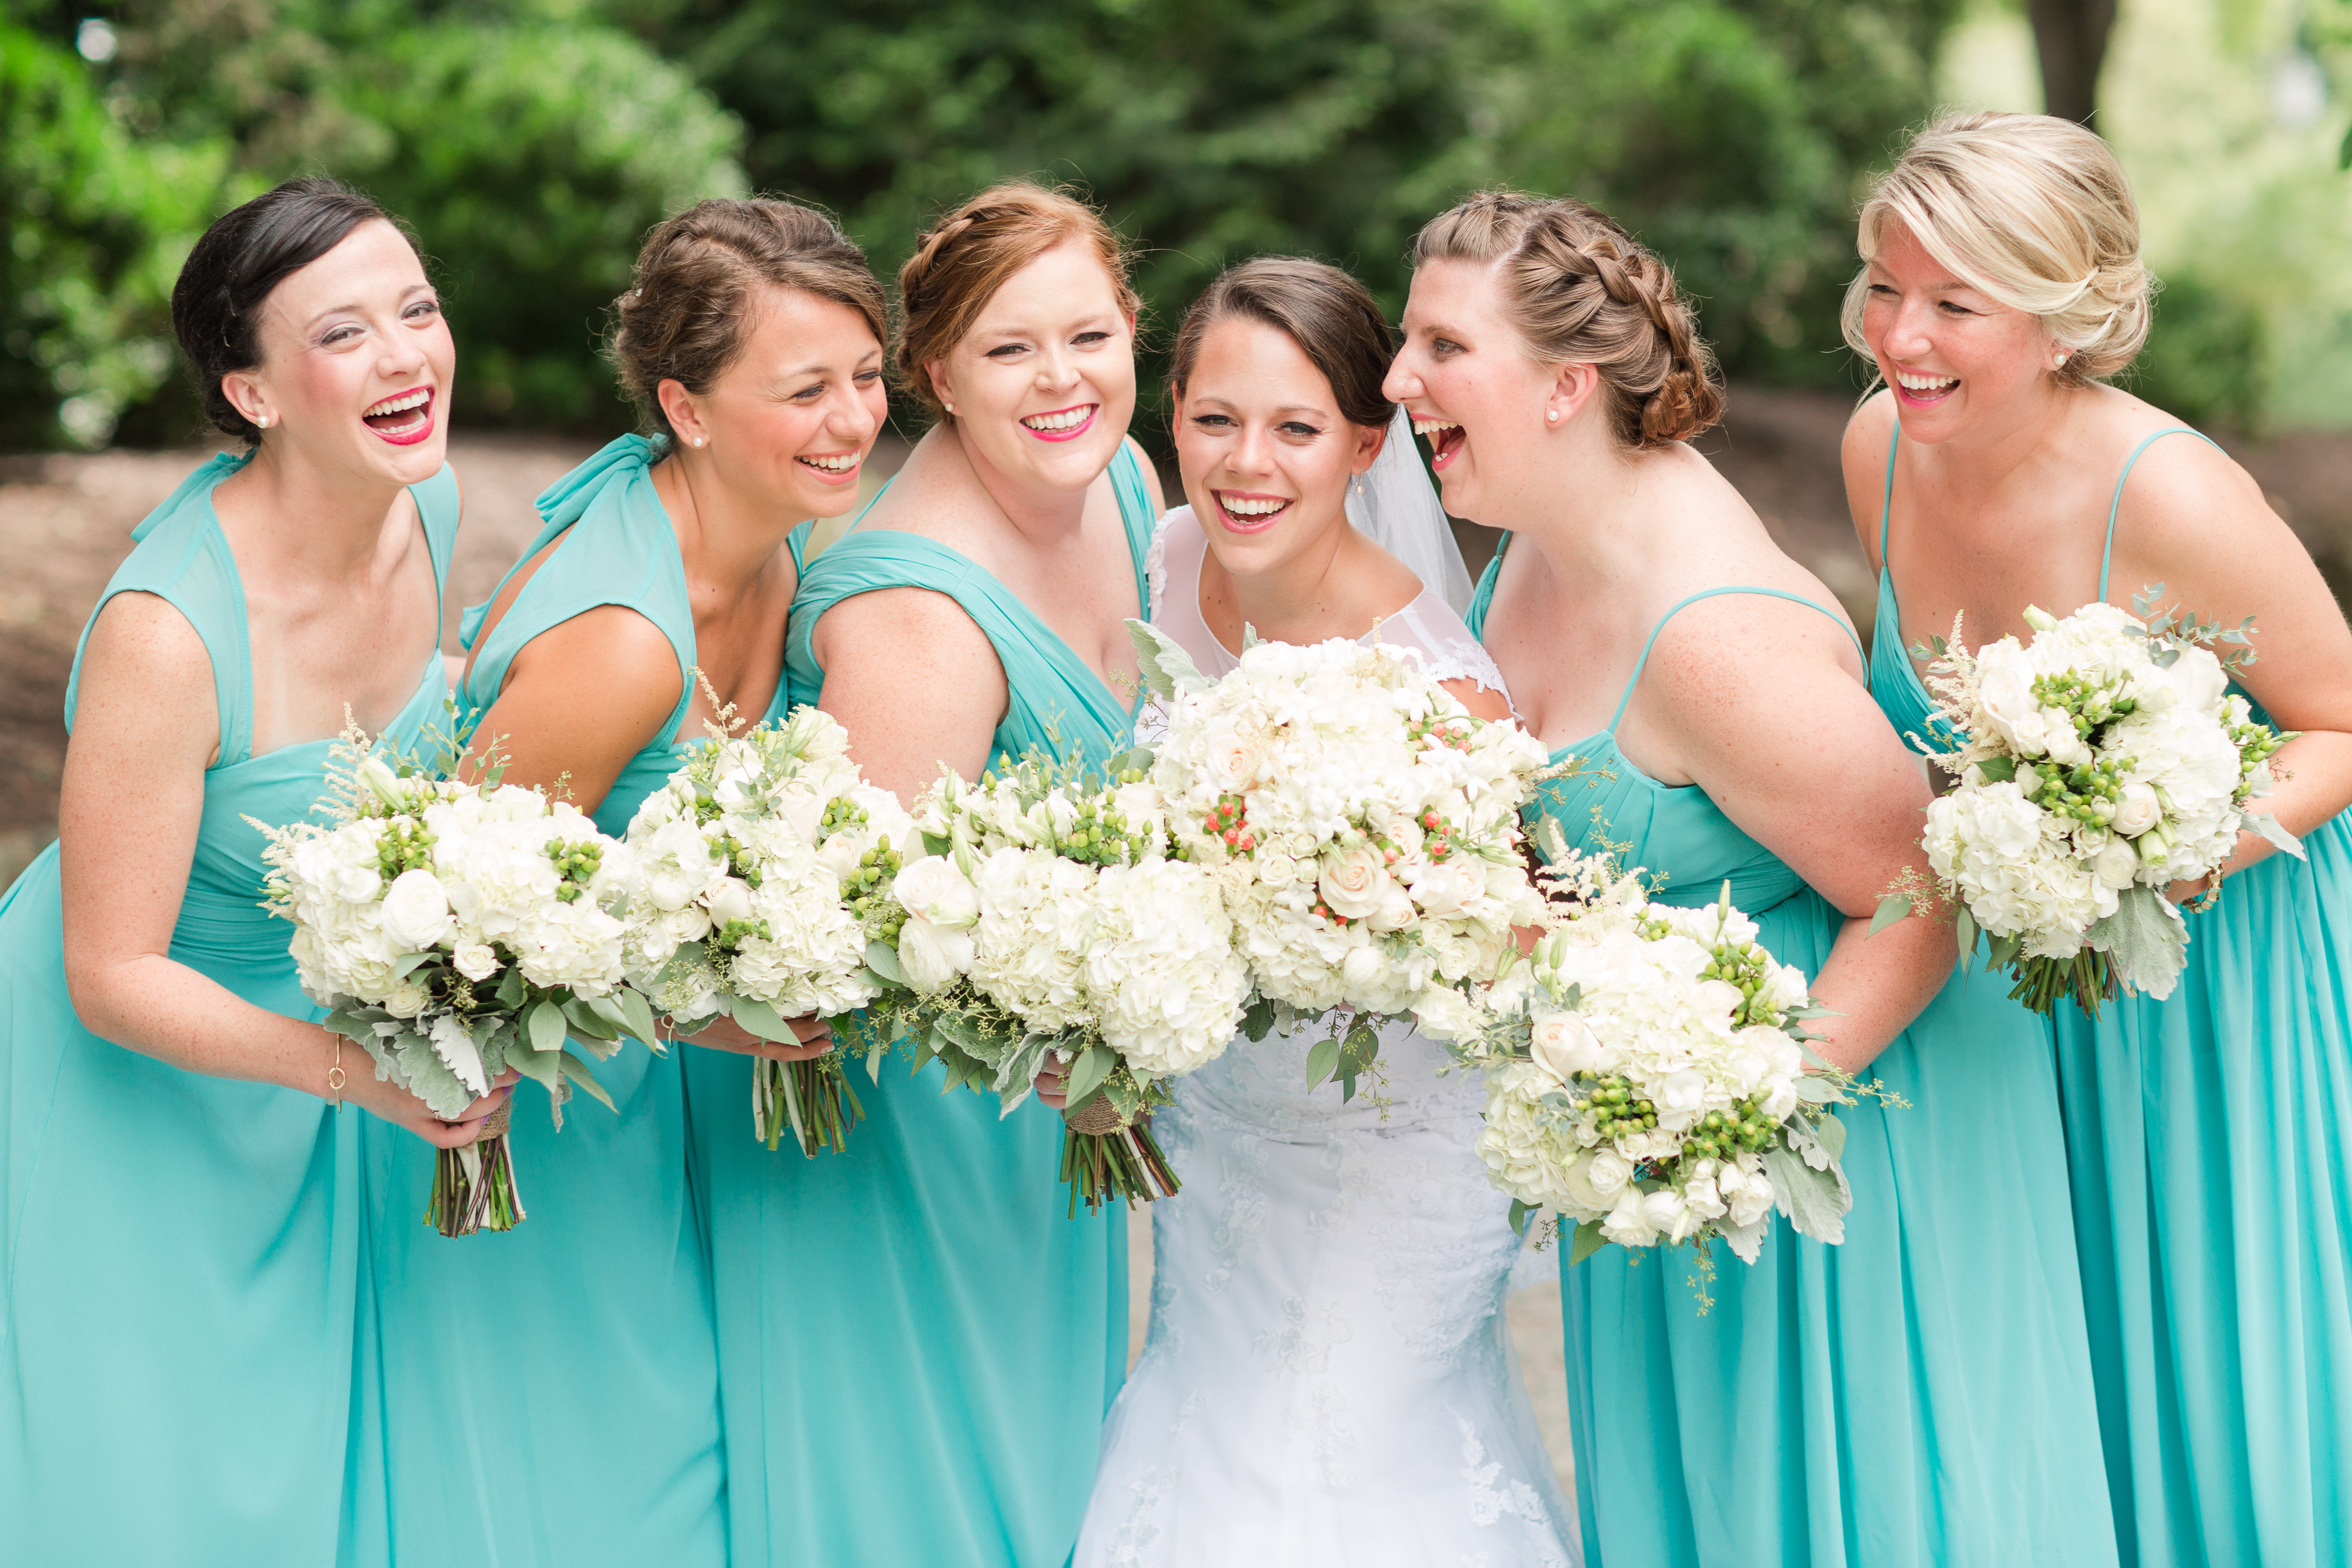 Lauren shares a happy moment with her bridesmaids